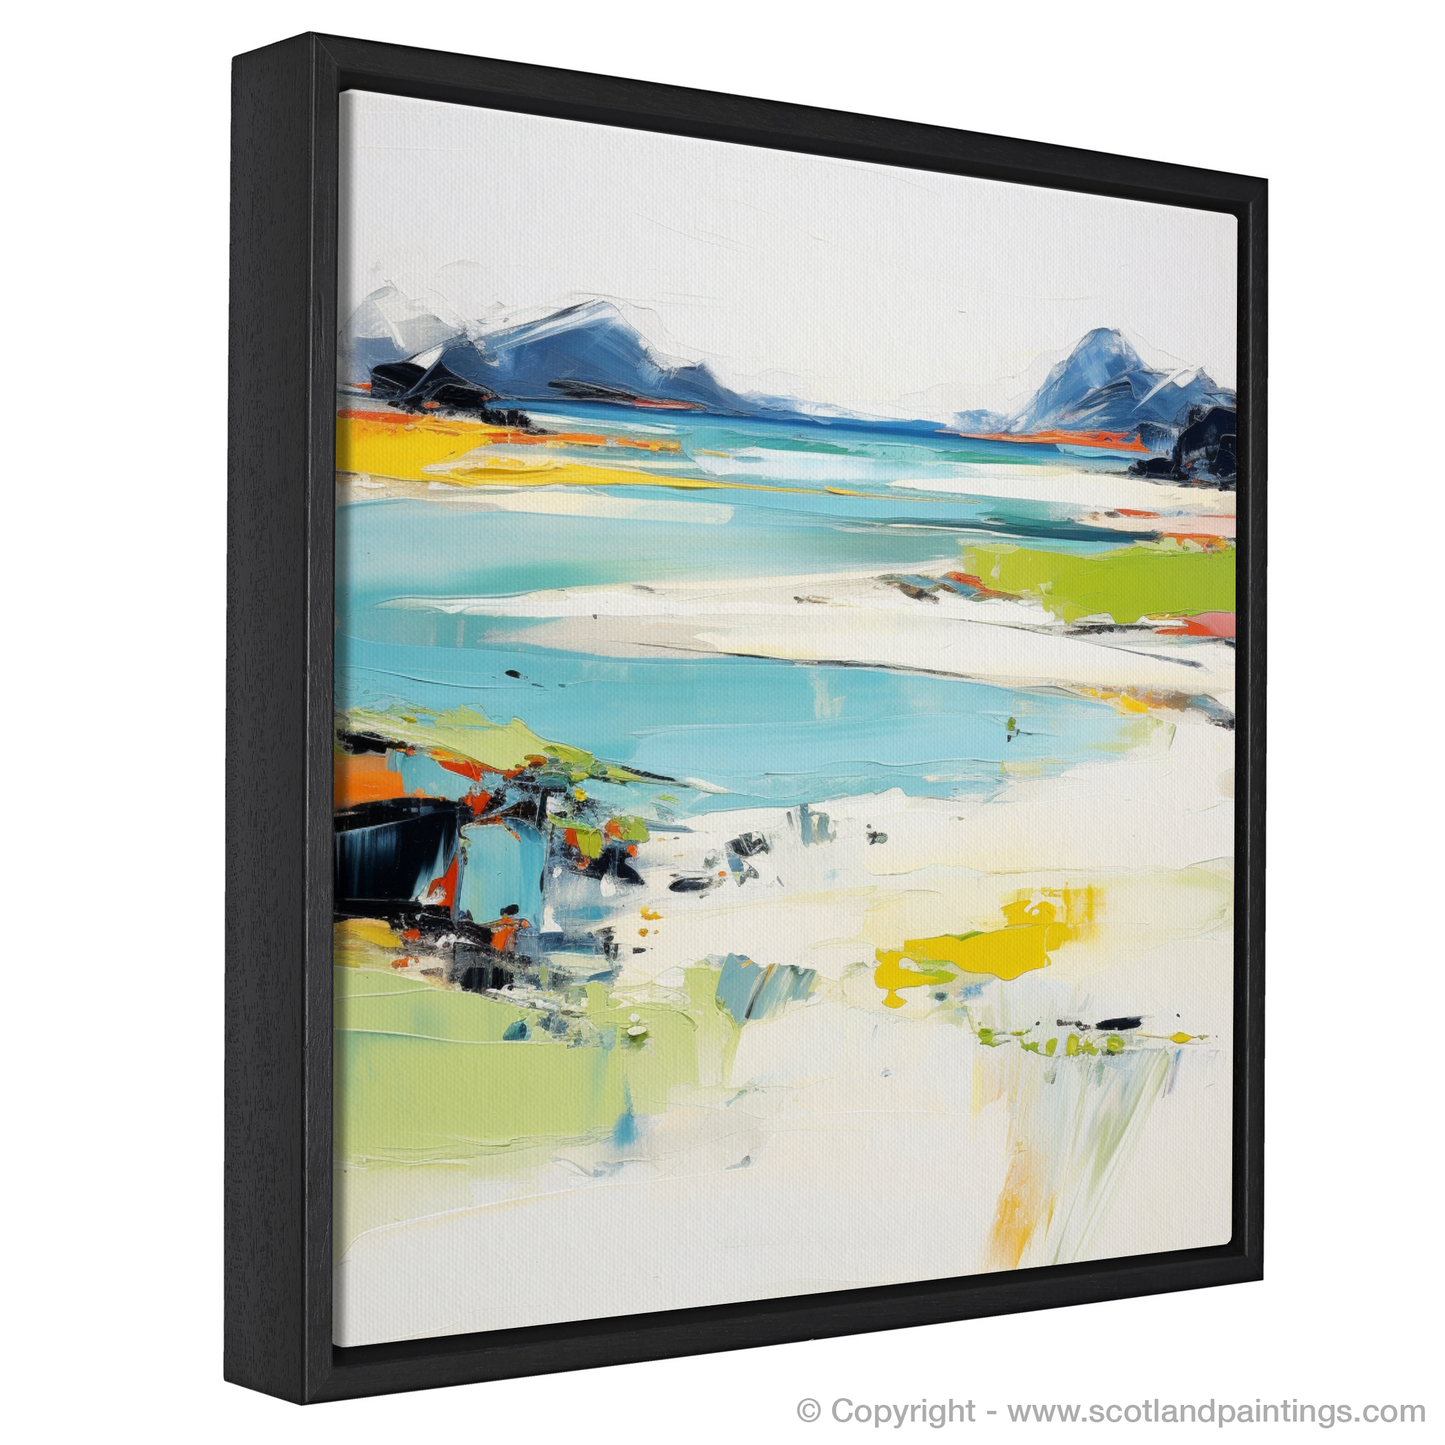 Painting and Art Print of Silver Sands of Morar in summer entitled "Summer Hues of Silver Sands Morar".